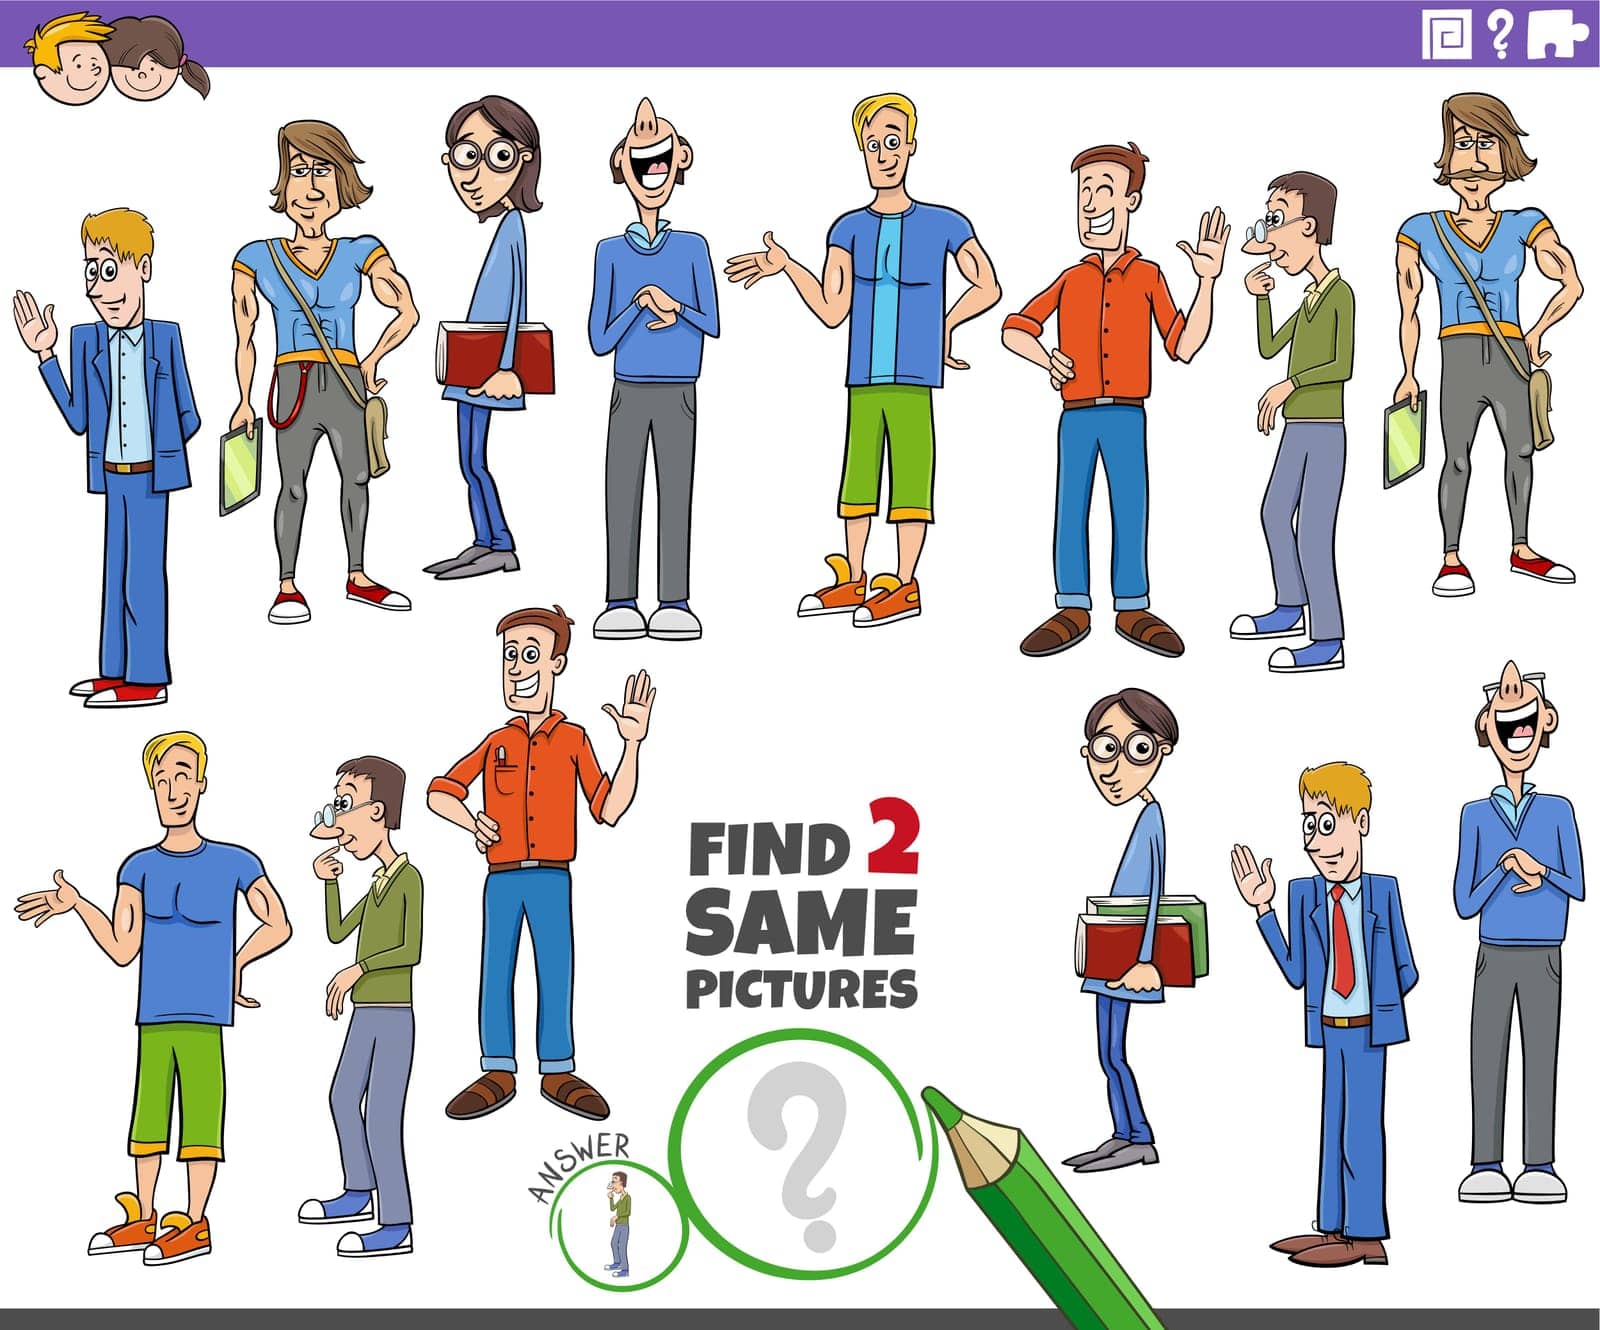 Cartoon illustration of finding two same pictures educational activity with guys or young men characters